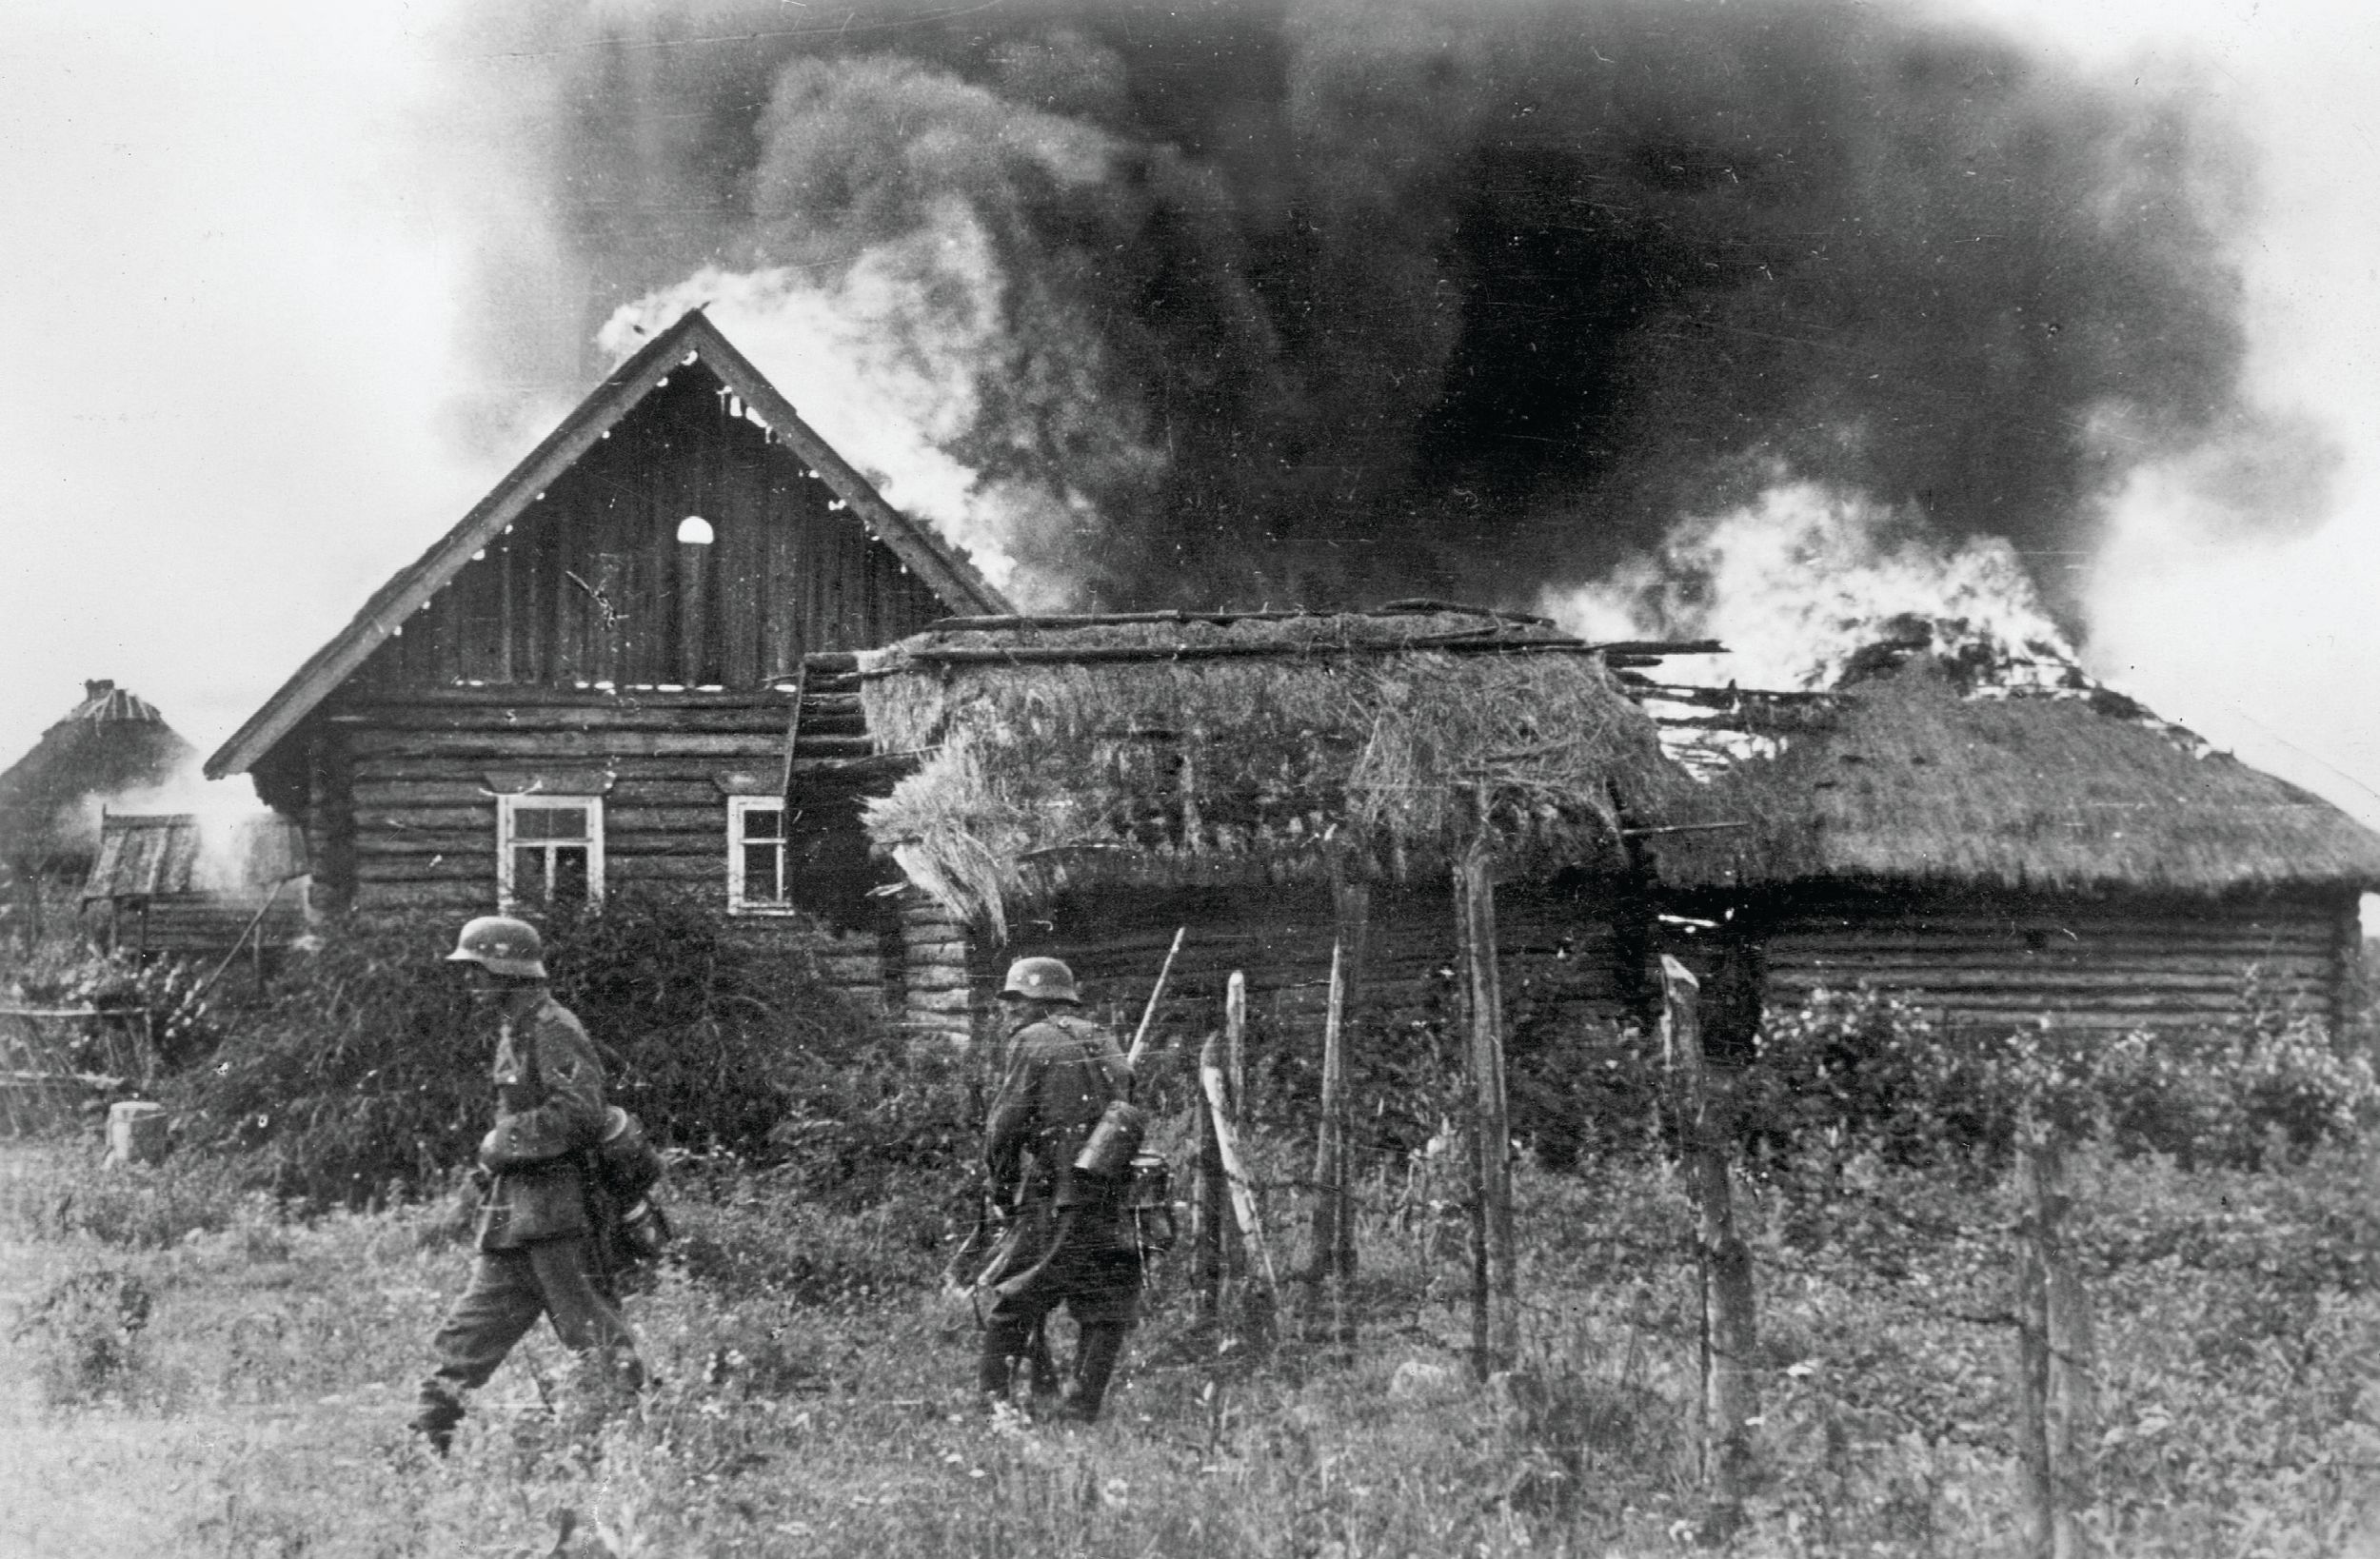 German soldiers set fire to a farm during the ruthless invasion of the Soviet Union, summer 1941. German troops and special police battalions also slaughtered Soviets in their path.